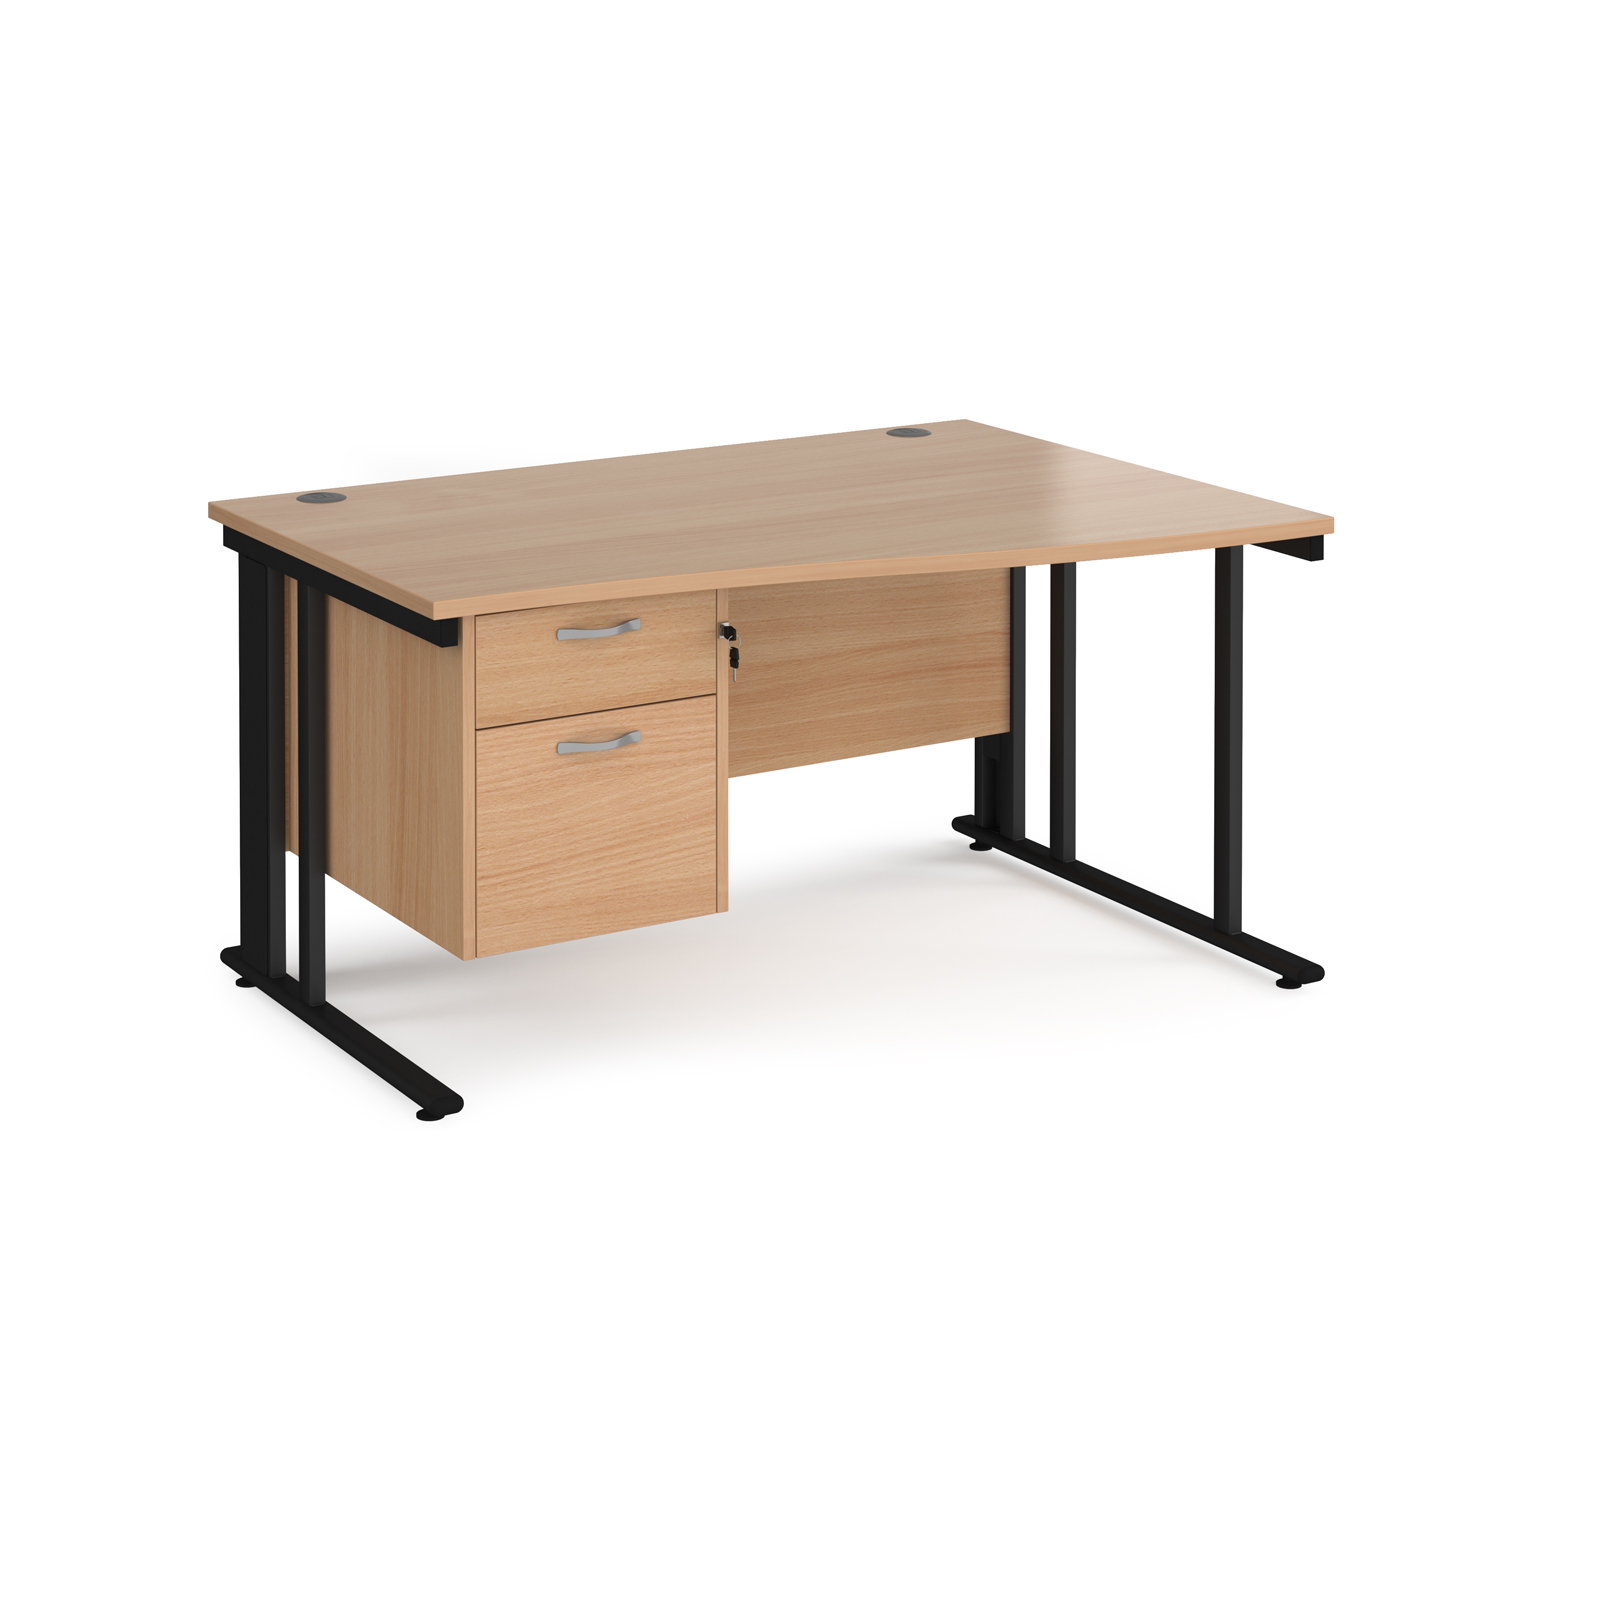 Maestro 25 right hand wave desk 1400mm wide with 2 drawer pedestal - black cable managed leg frame, beech top